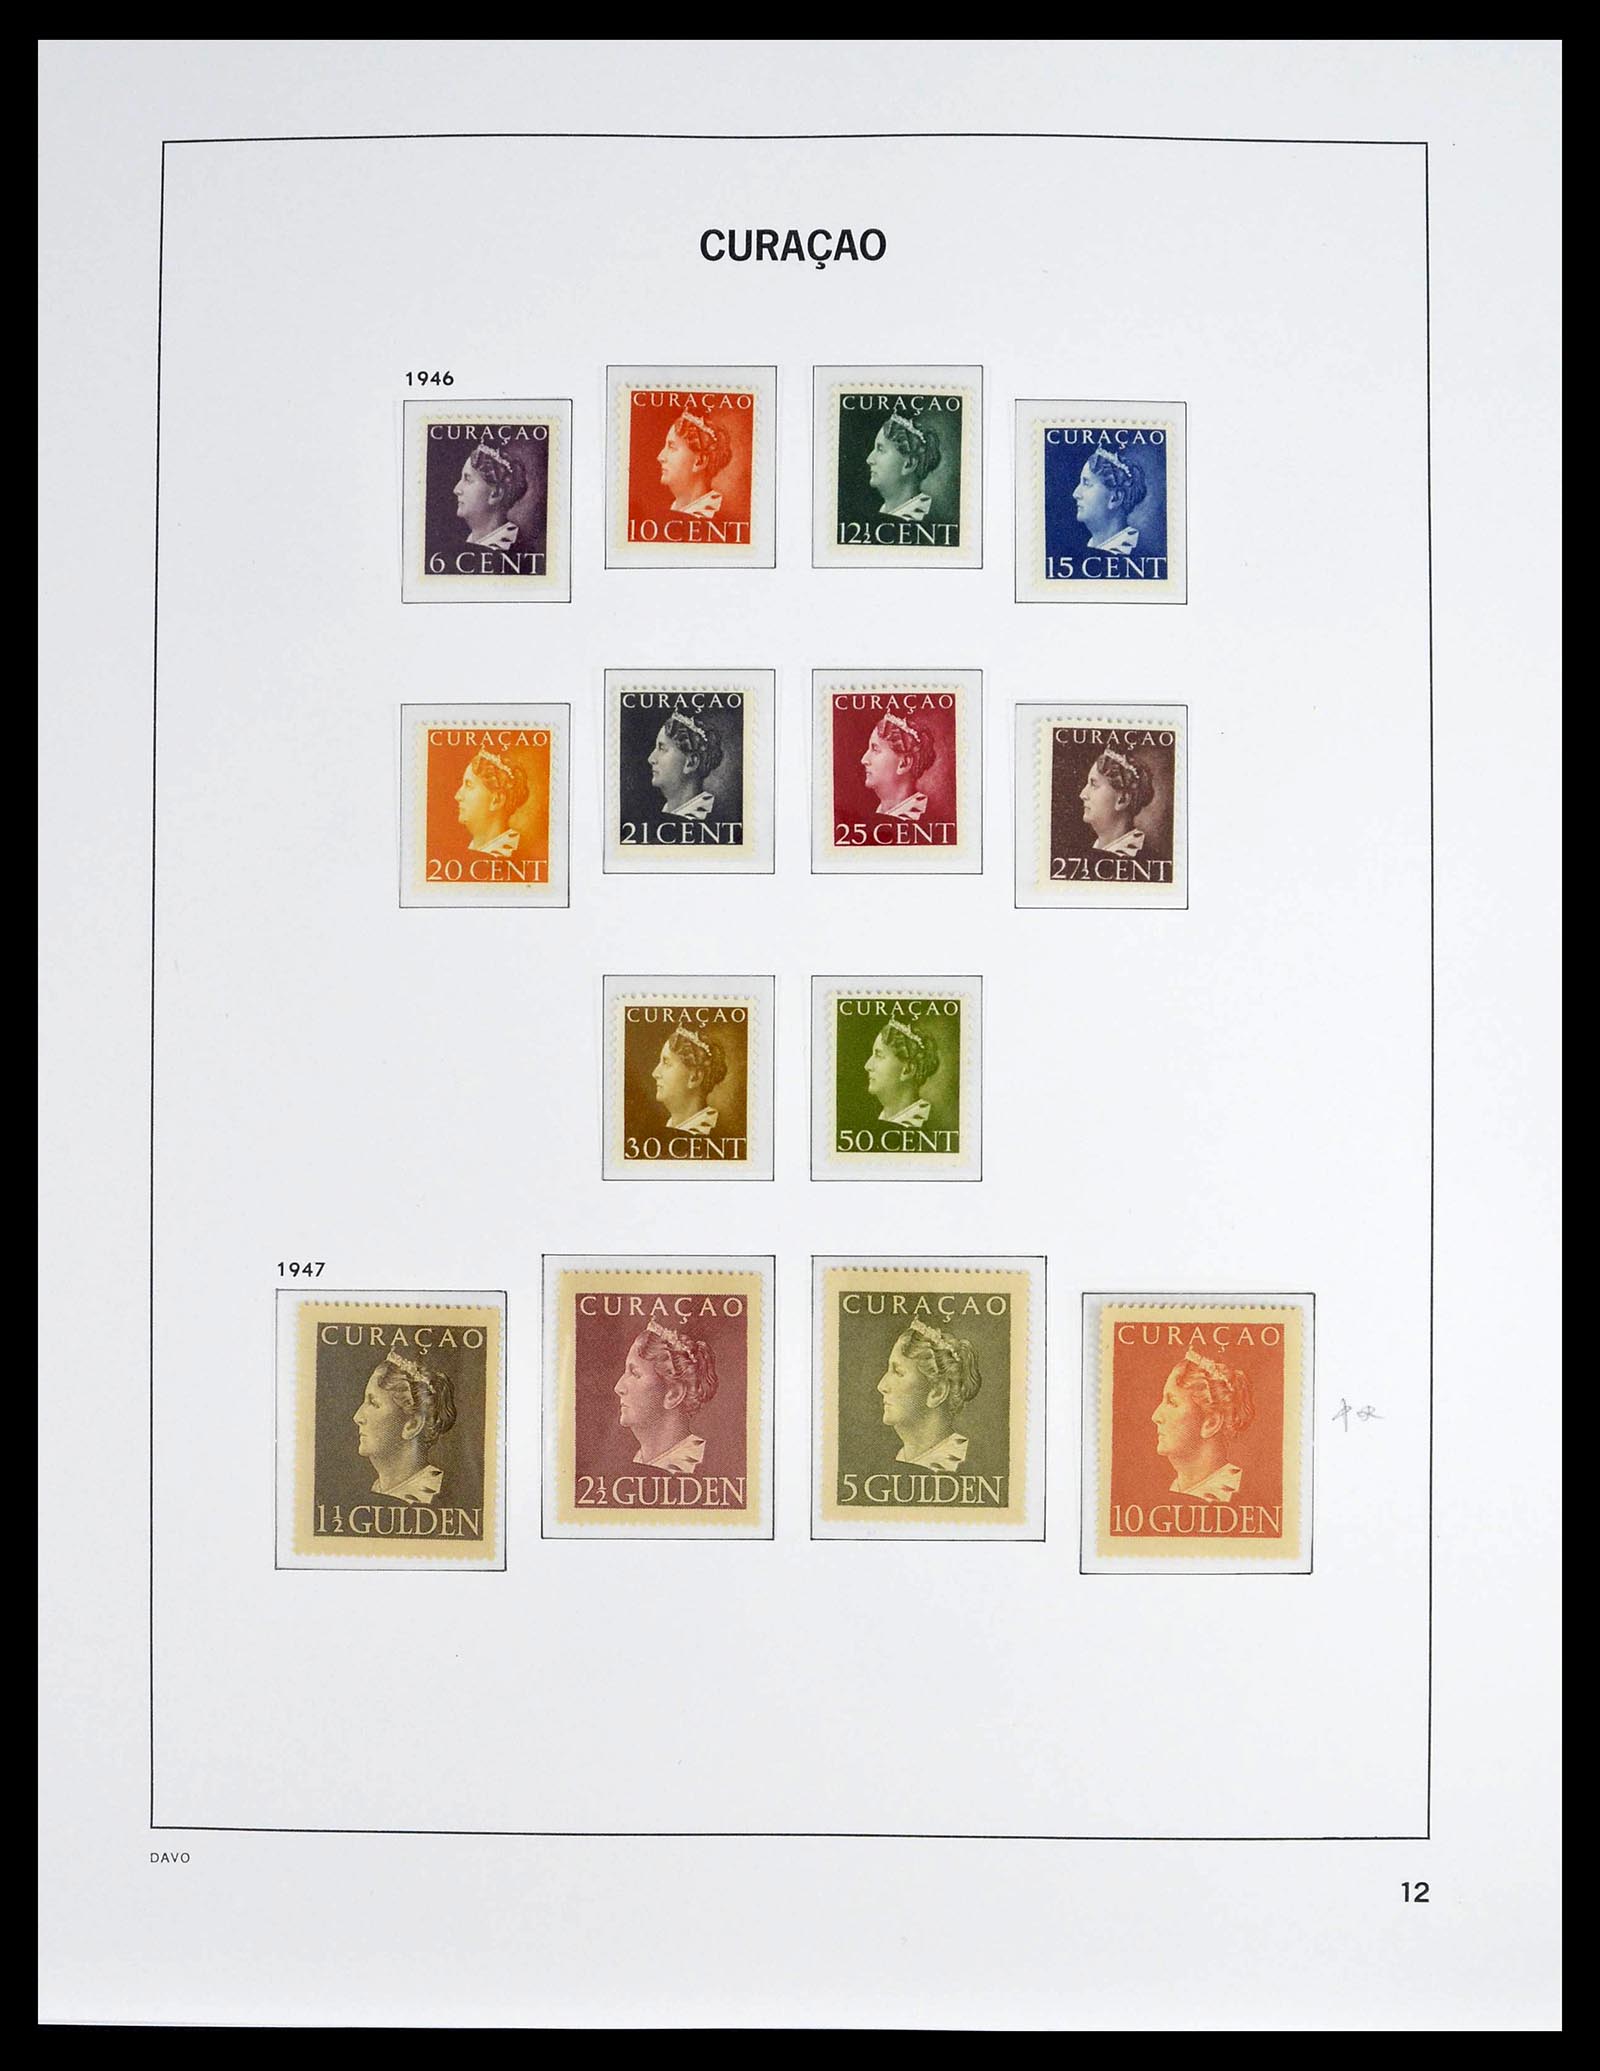 39360 0012 - Stamp collection 39360 Curaçao/Antilles complete 1873-2013.